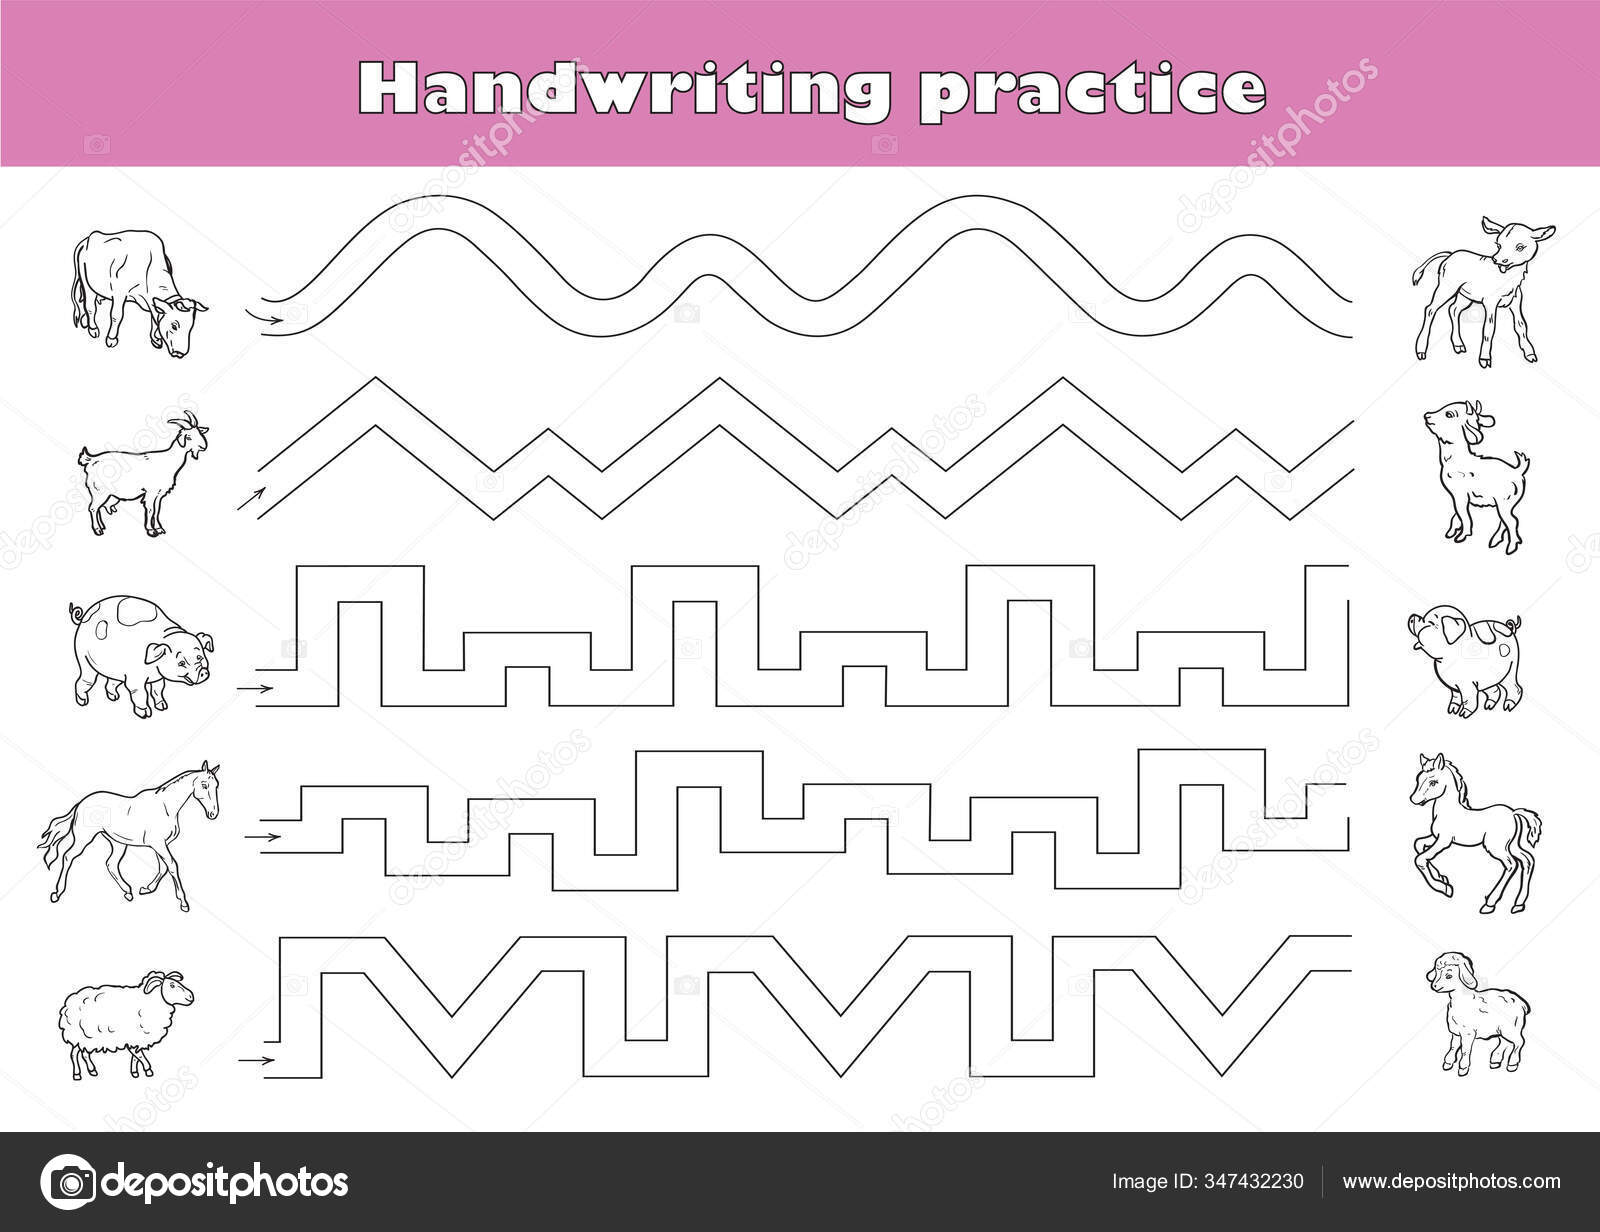 Kindergarten Handwriting worksheets: Fun and Educational Activities for  Young Learners